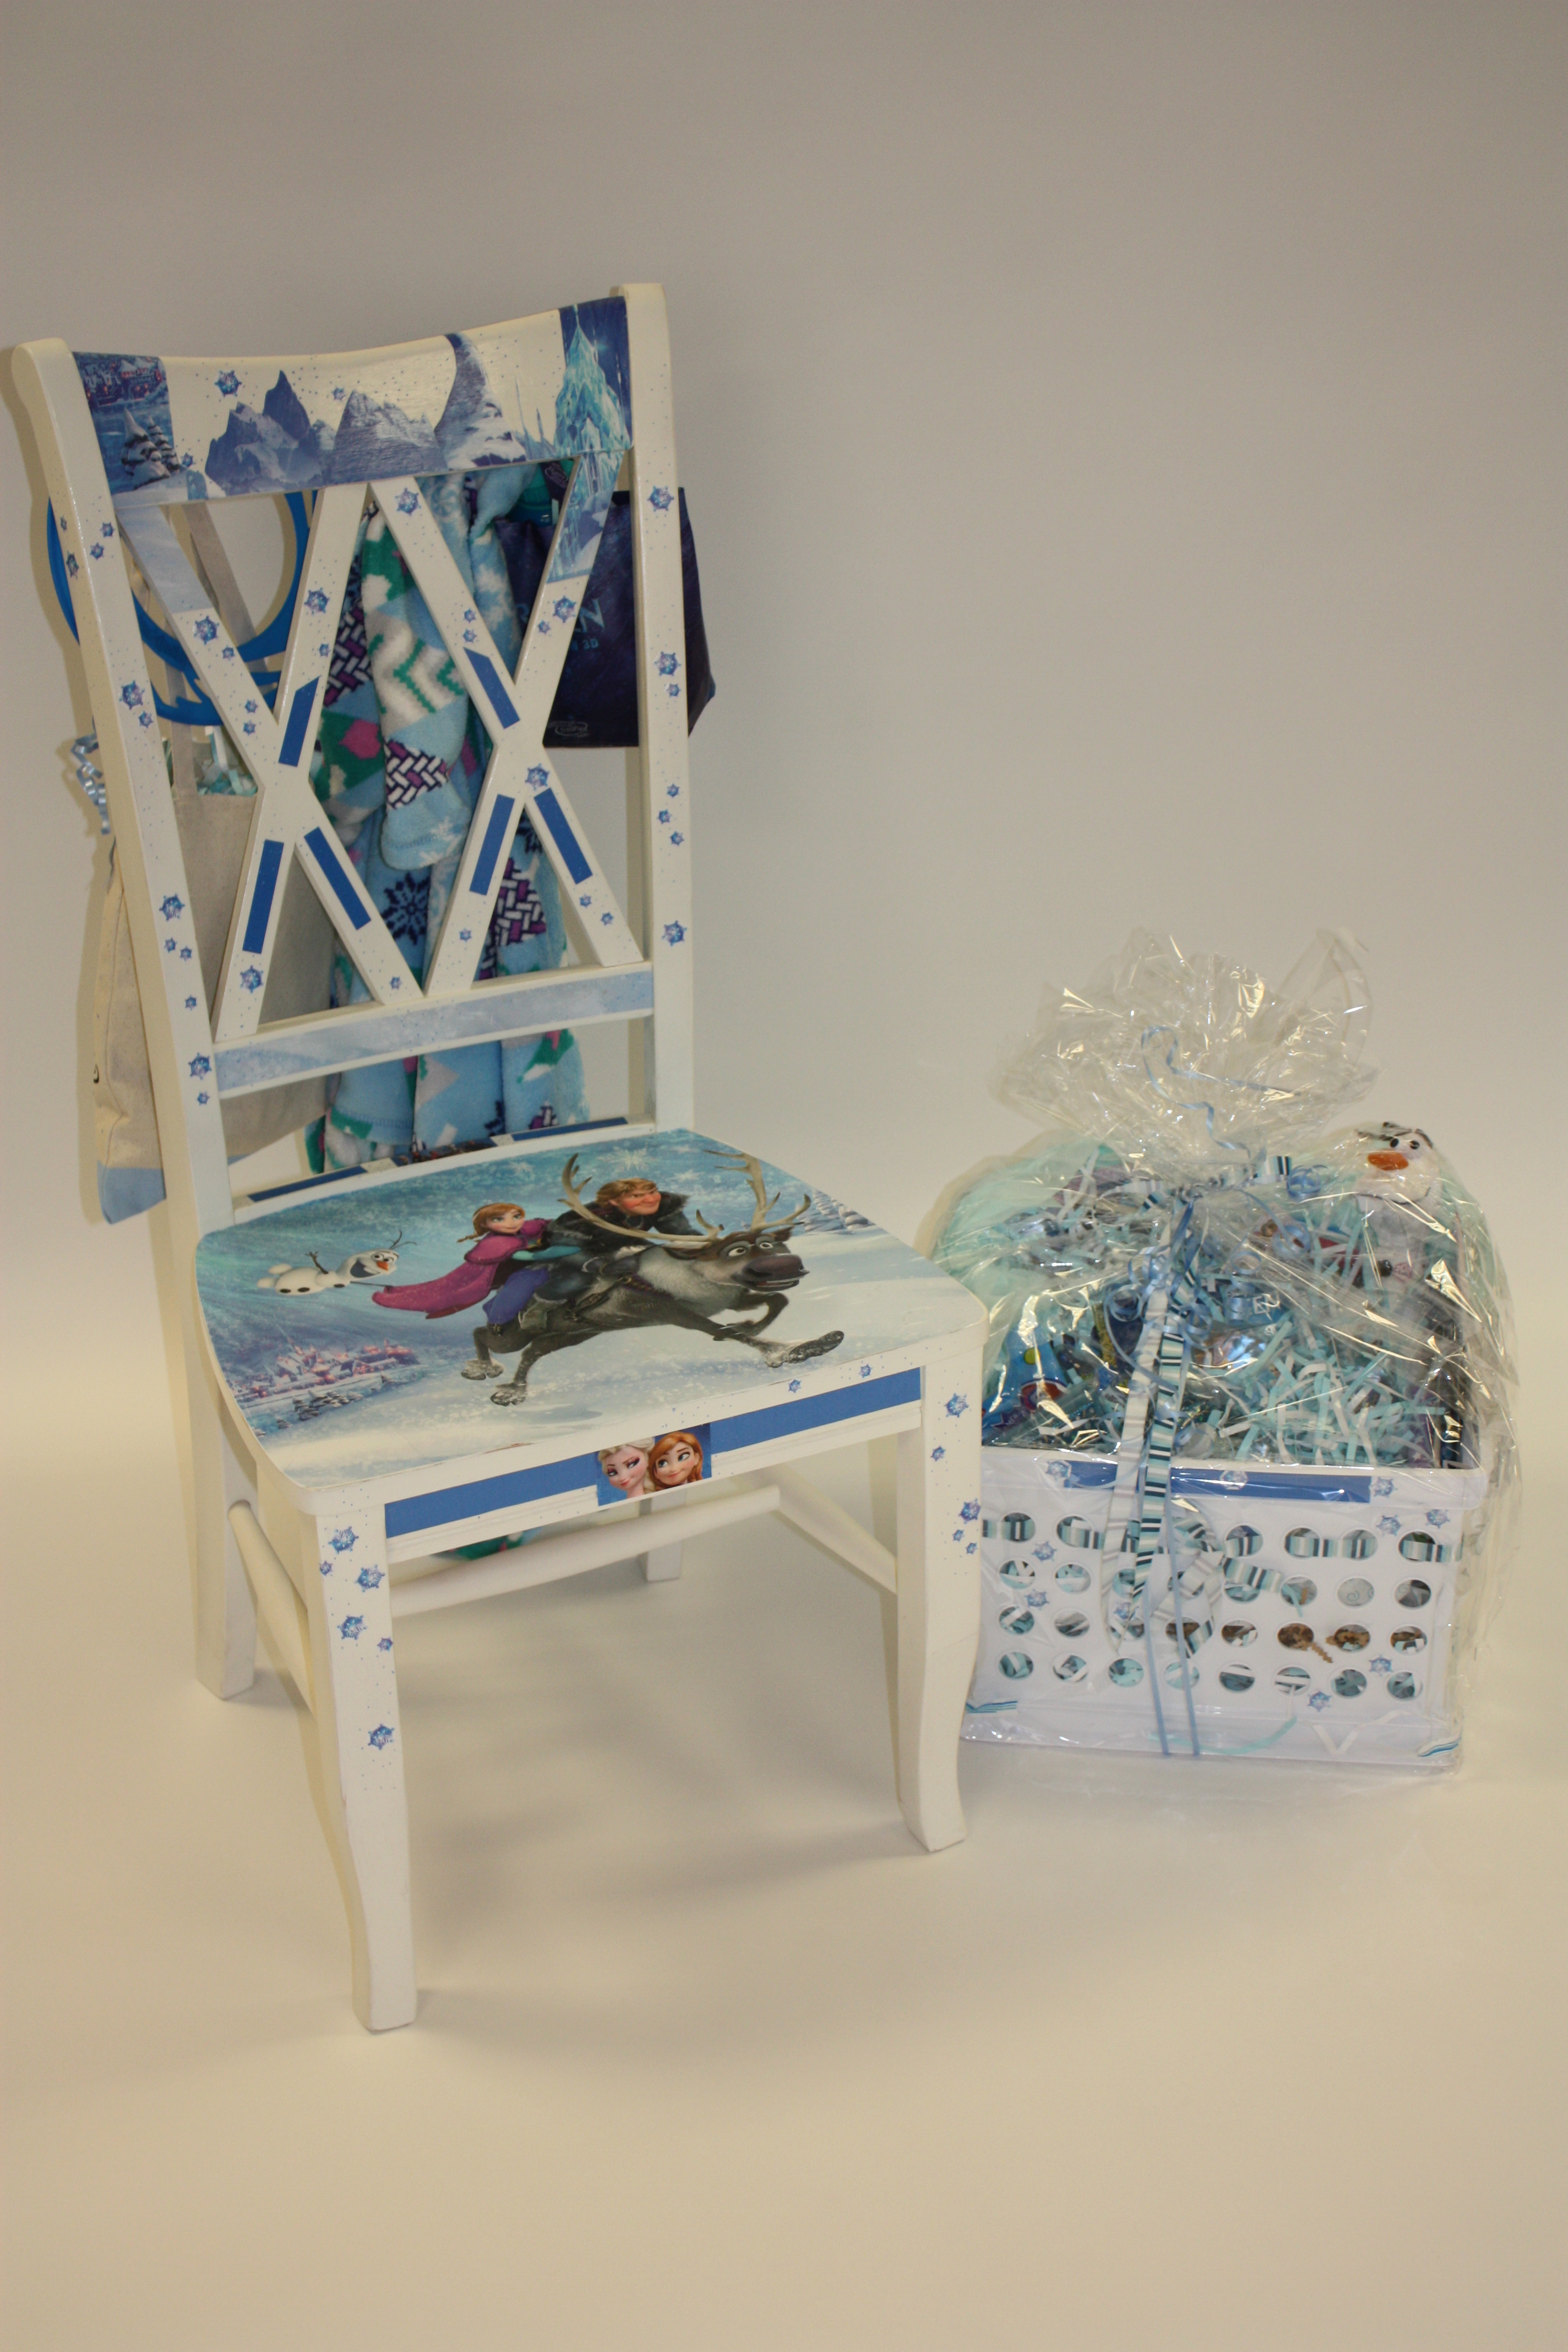 The “Frozen” themed chair was created by Zionsville artist Terry Gocking. (Submitted photo)